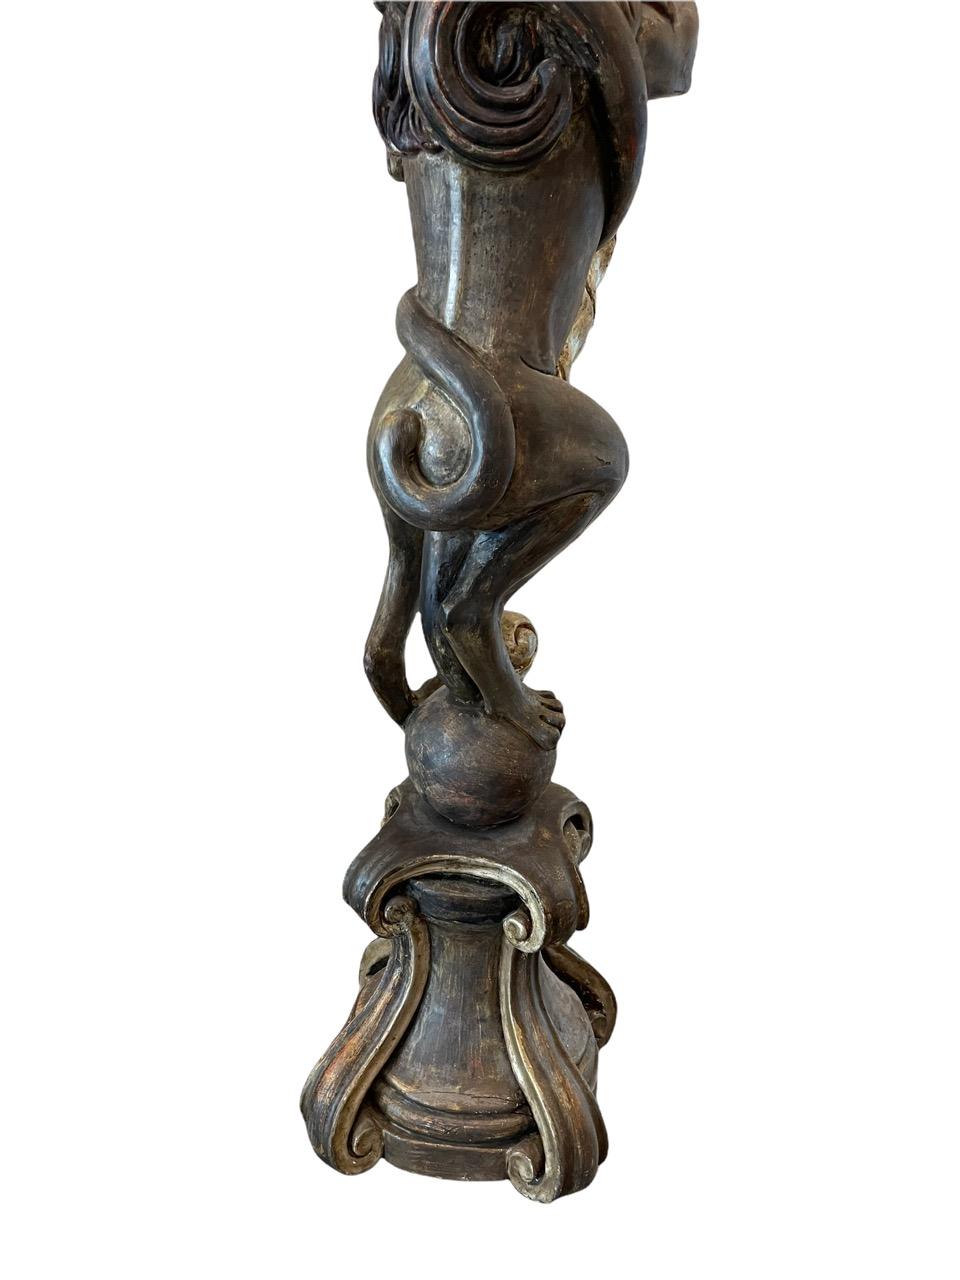 19th Century Russian Empire Carved Wood Candle Holder Sculpture For Sale 10